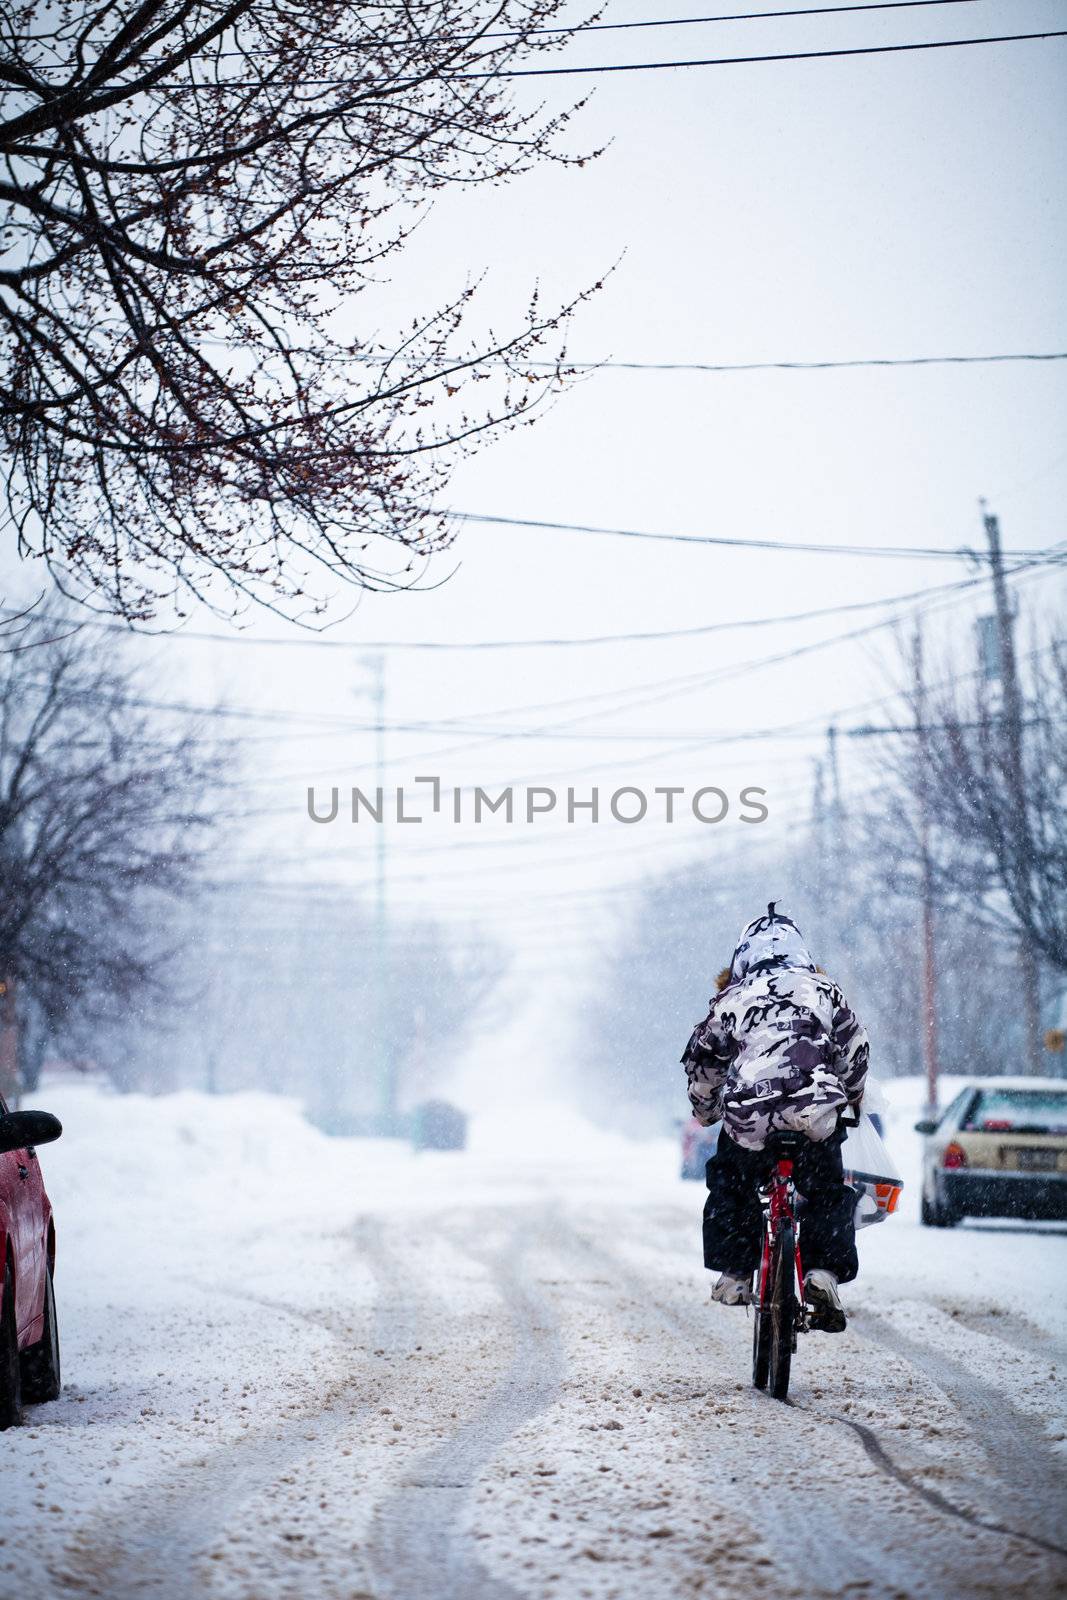 Courageous biker during a winter storm - editorial
 by aetb